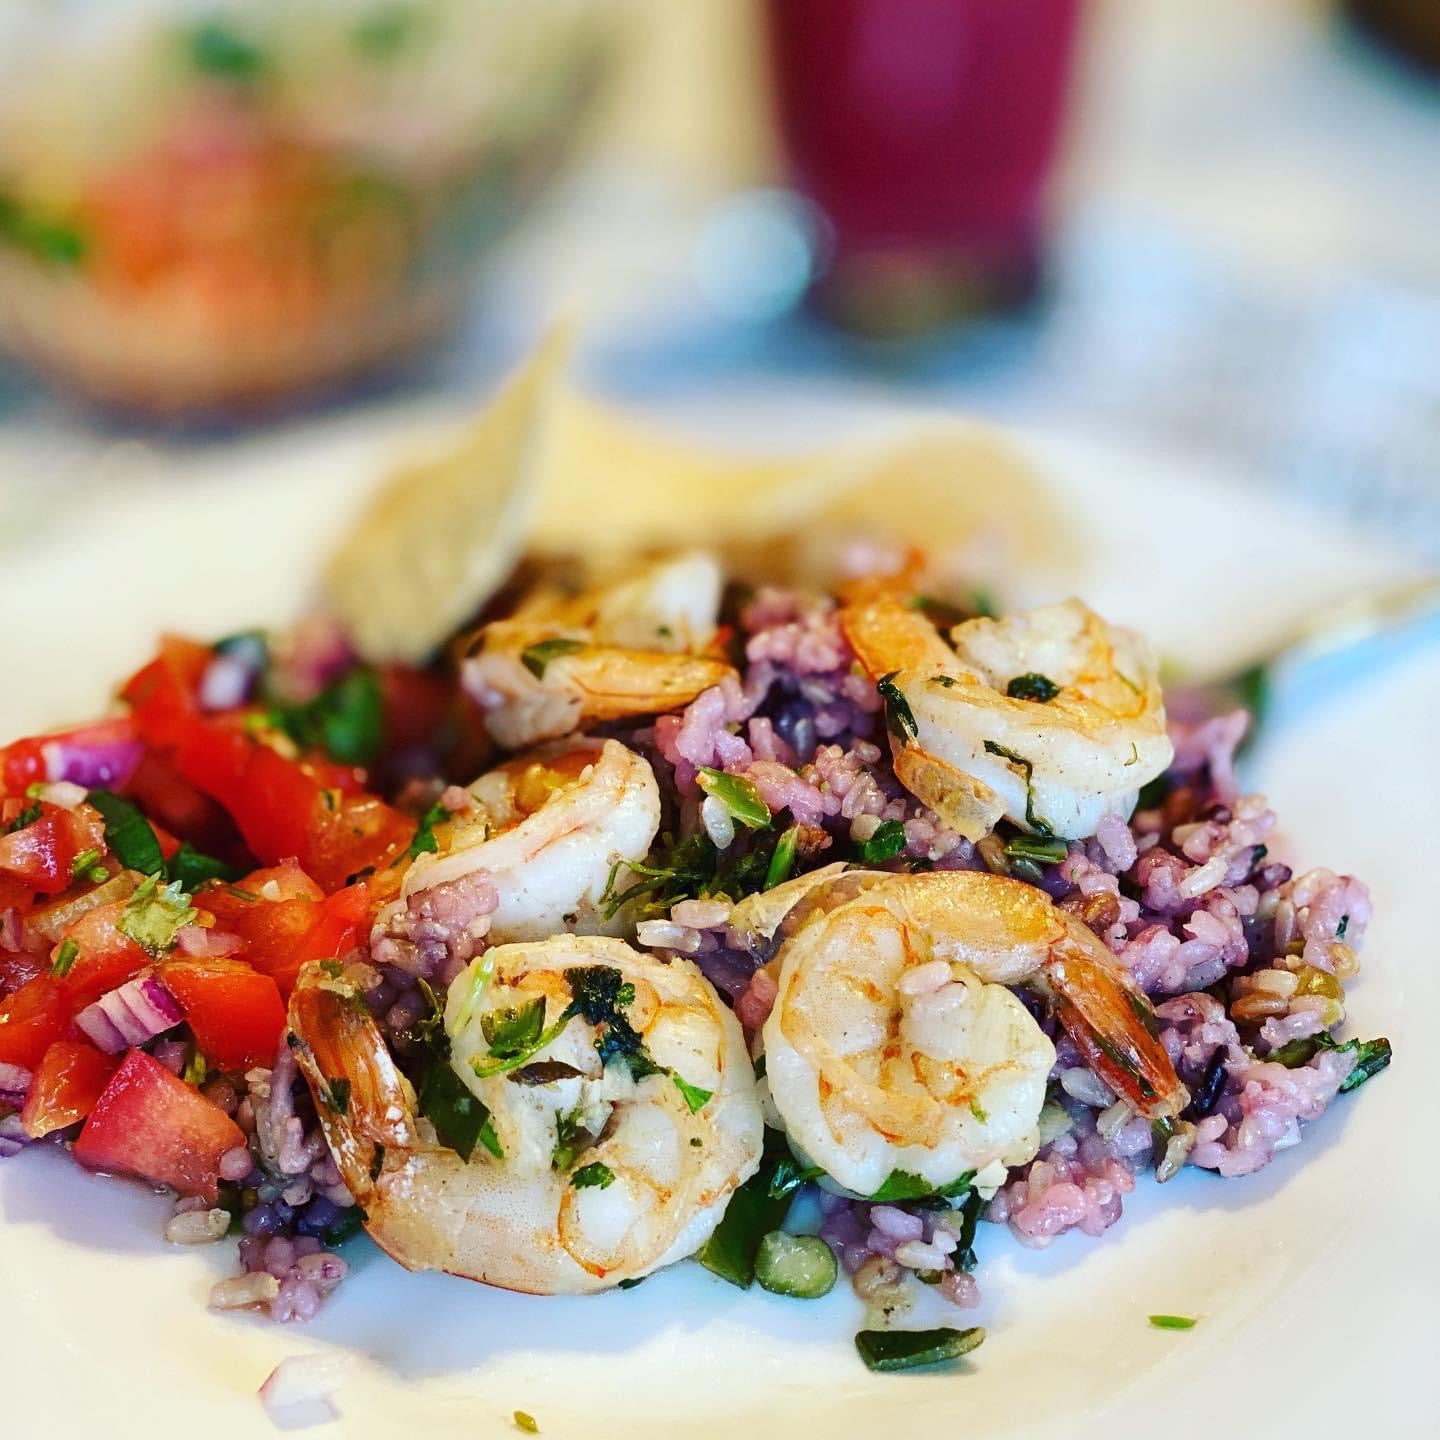 Easy One Pot Meal with Baja Garlic Shrimp and Mixed Whole Grains